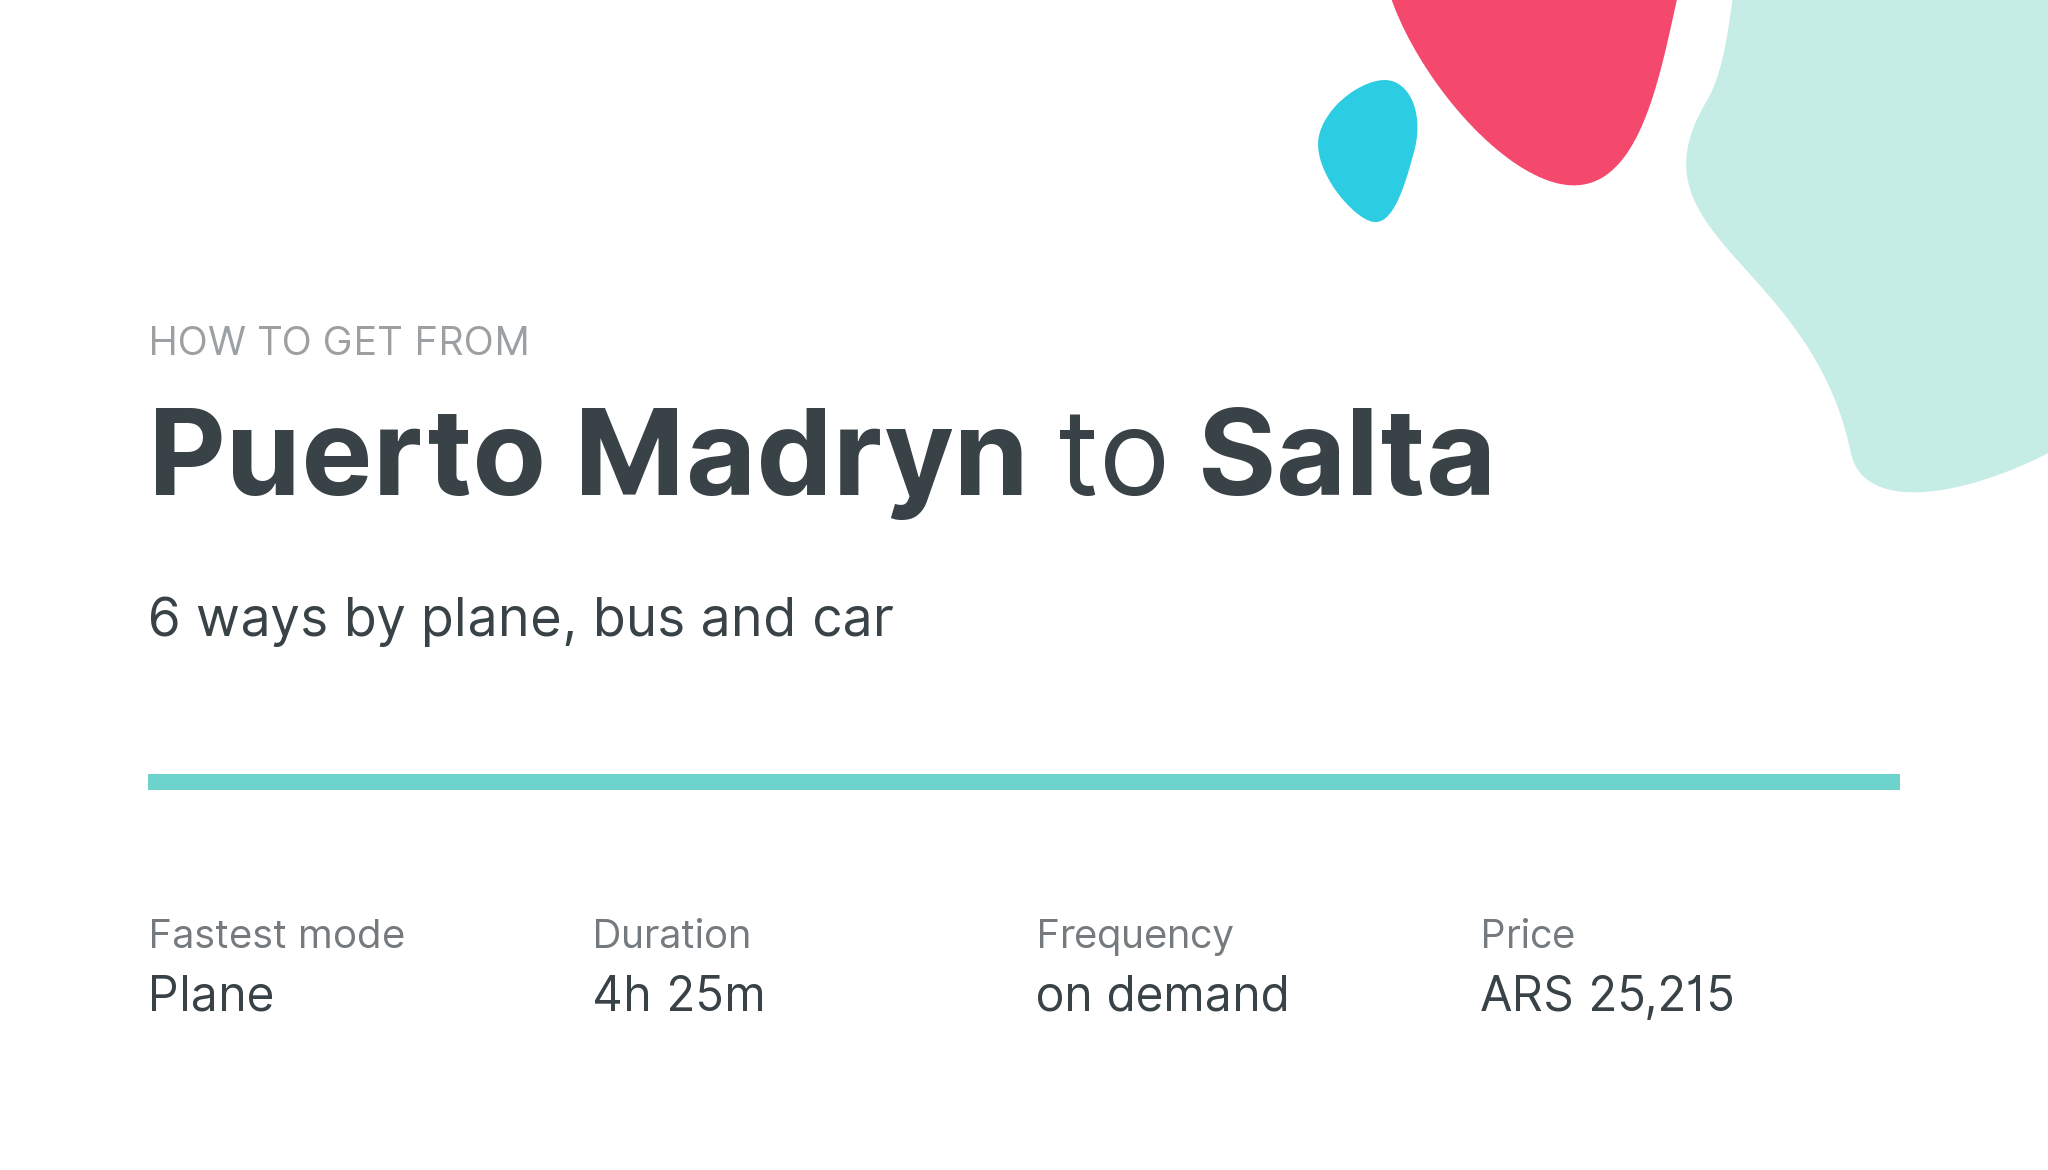 How do I get from Puerto Madryn to Salta